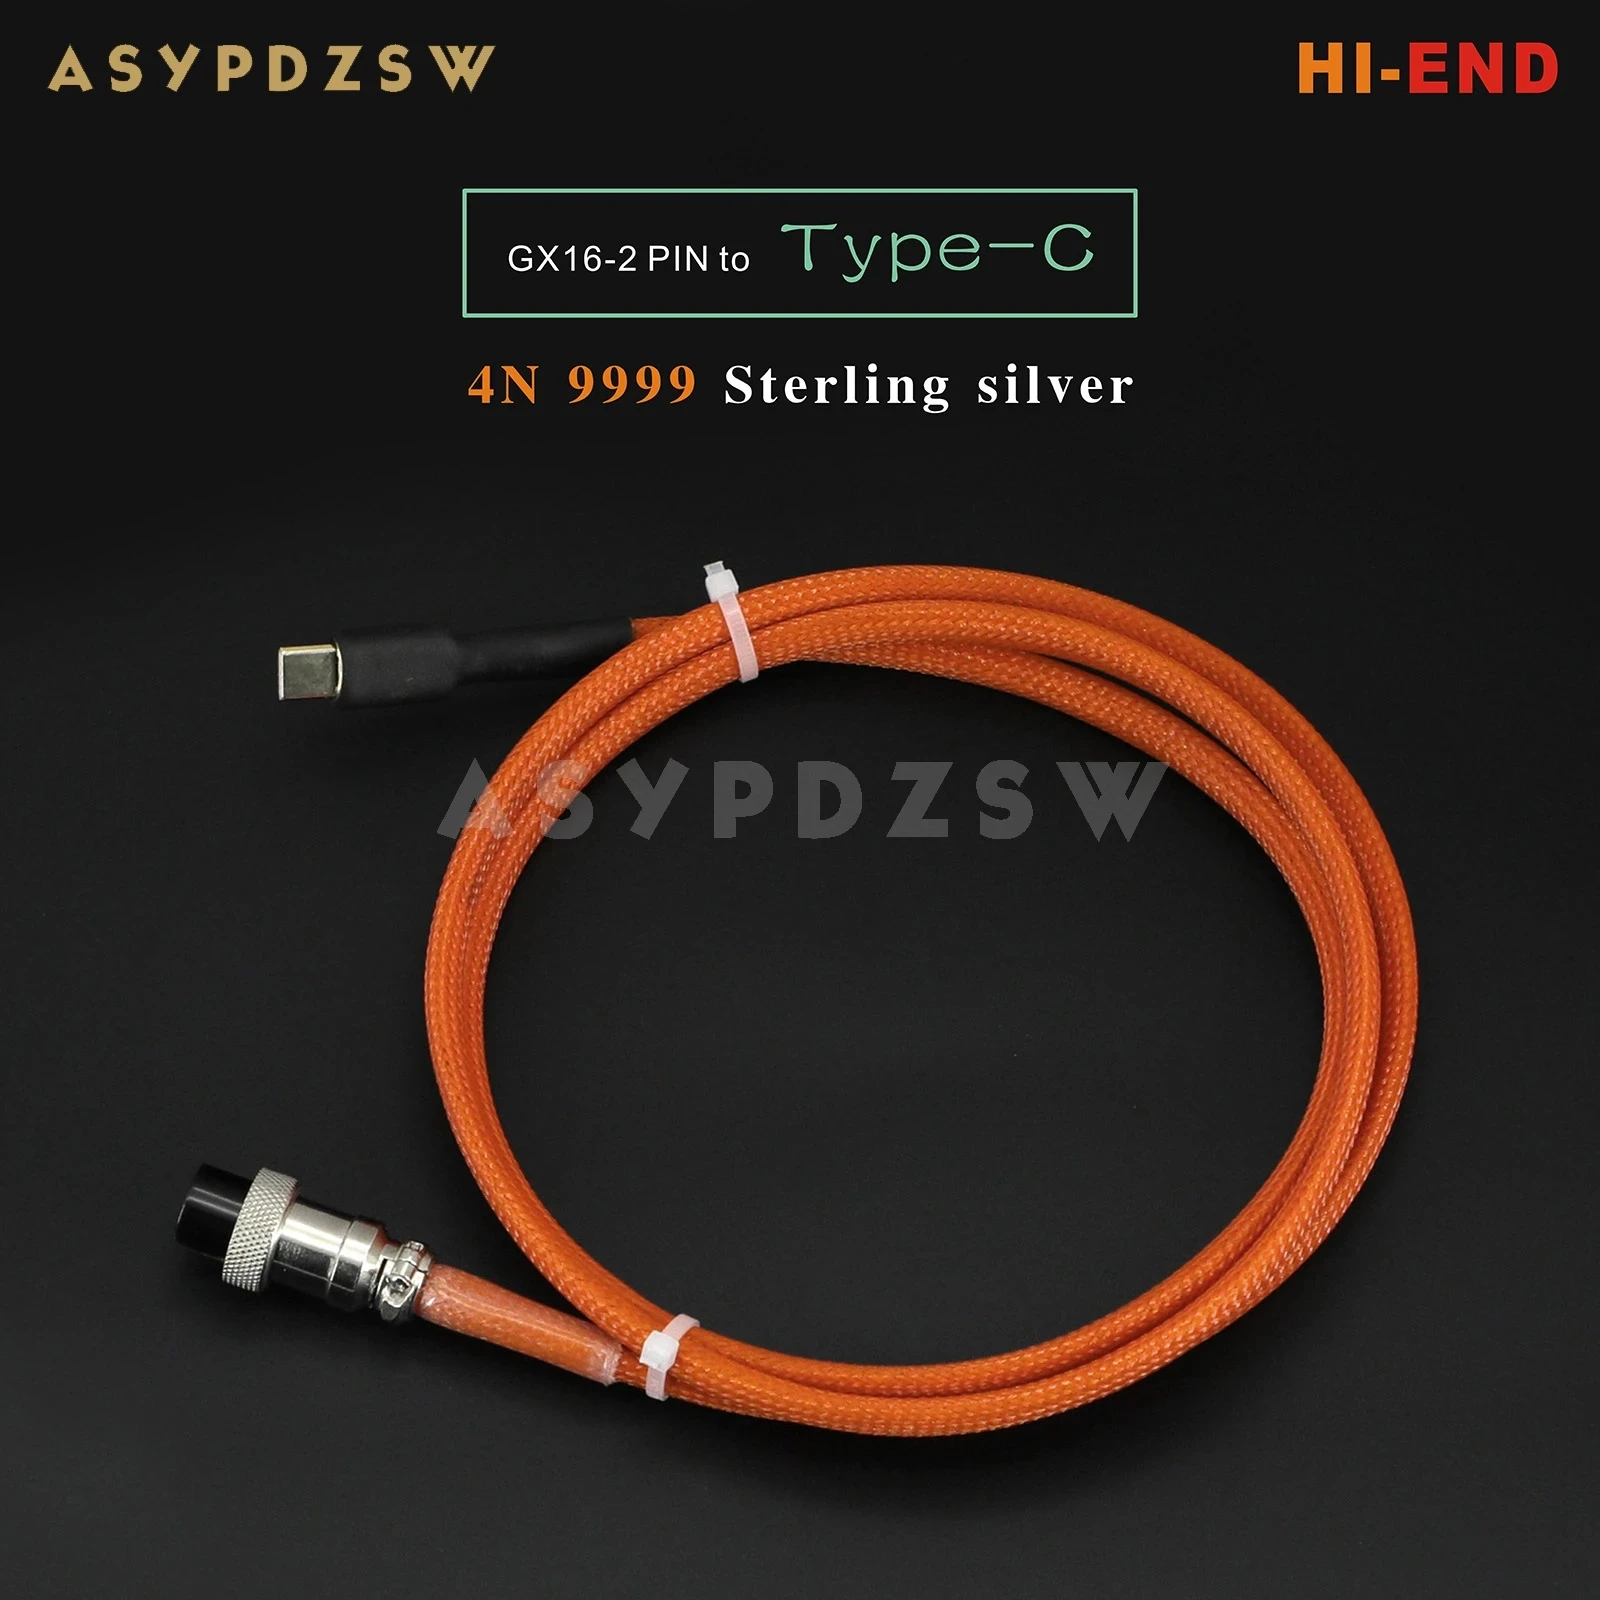 

1.2M HI-END 4N 9999 Sterling silver Liear power supply Cable GX16-2 PIN Plug to Type-C Plug PSU Cable